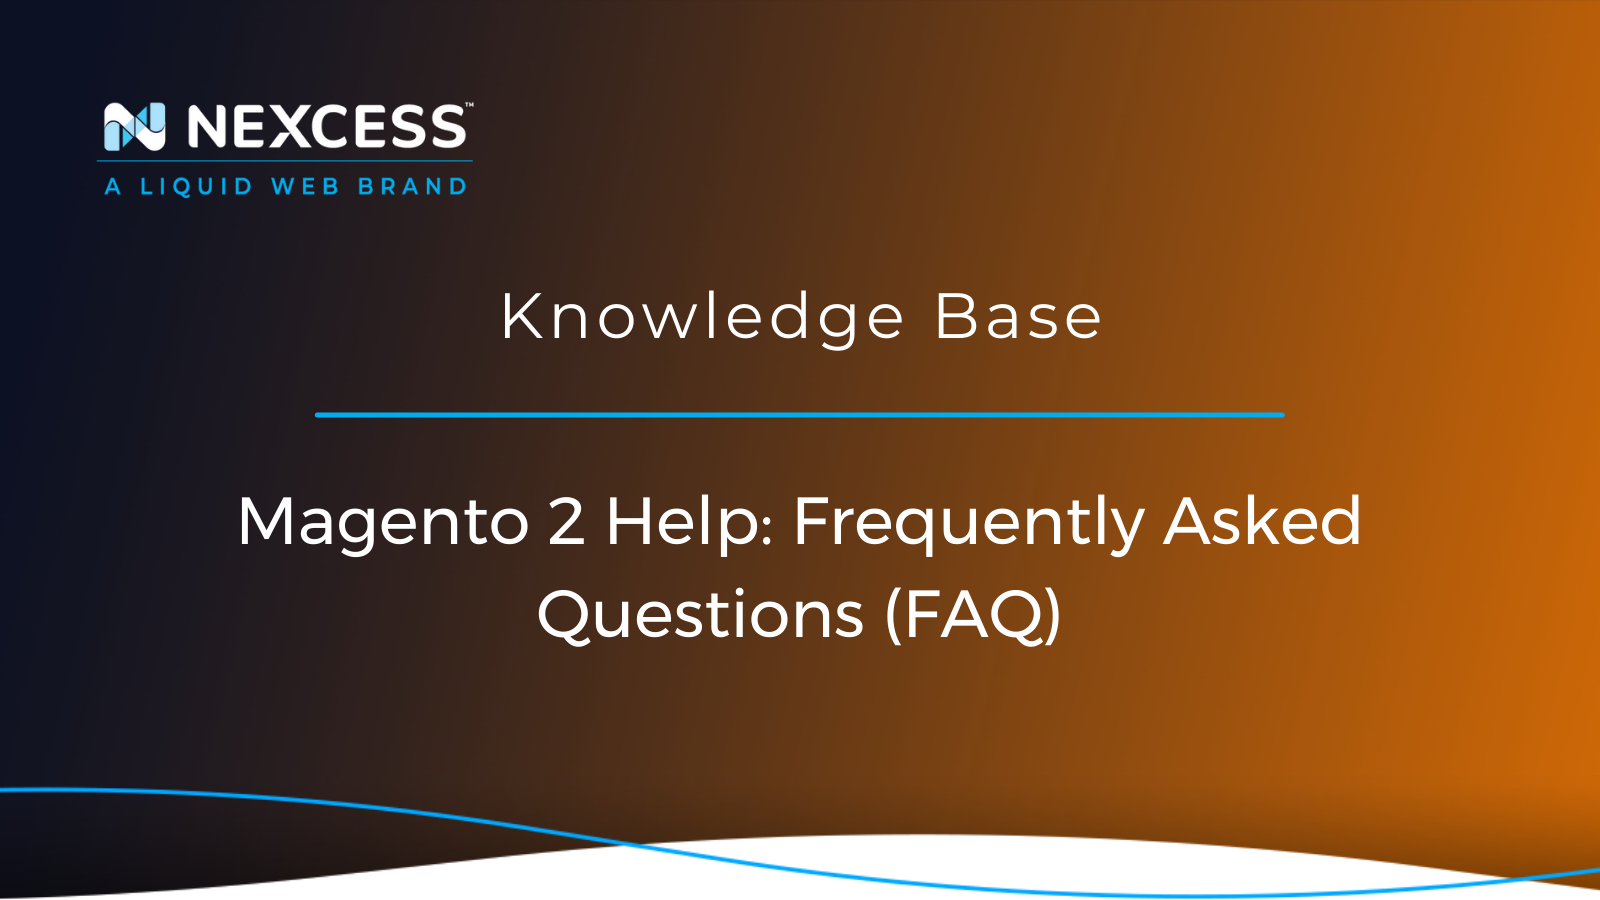 Magento 2 Help: Frequently Asked Questions (FAQ)